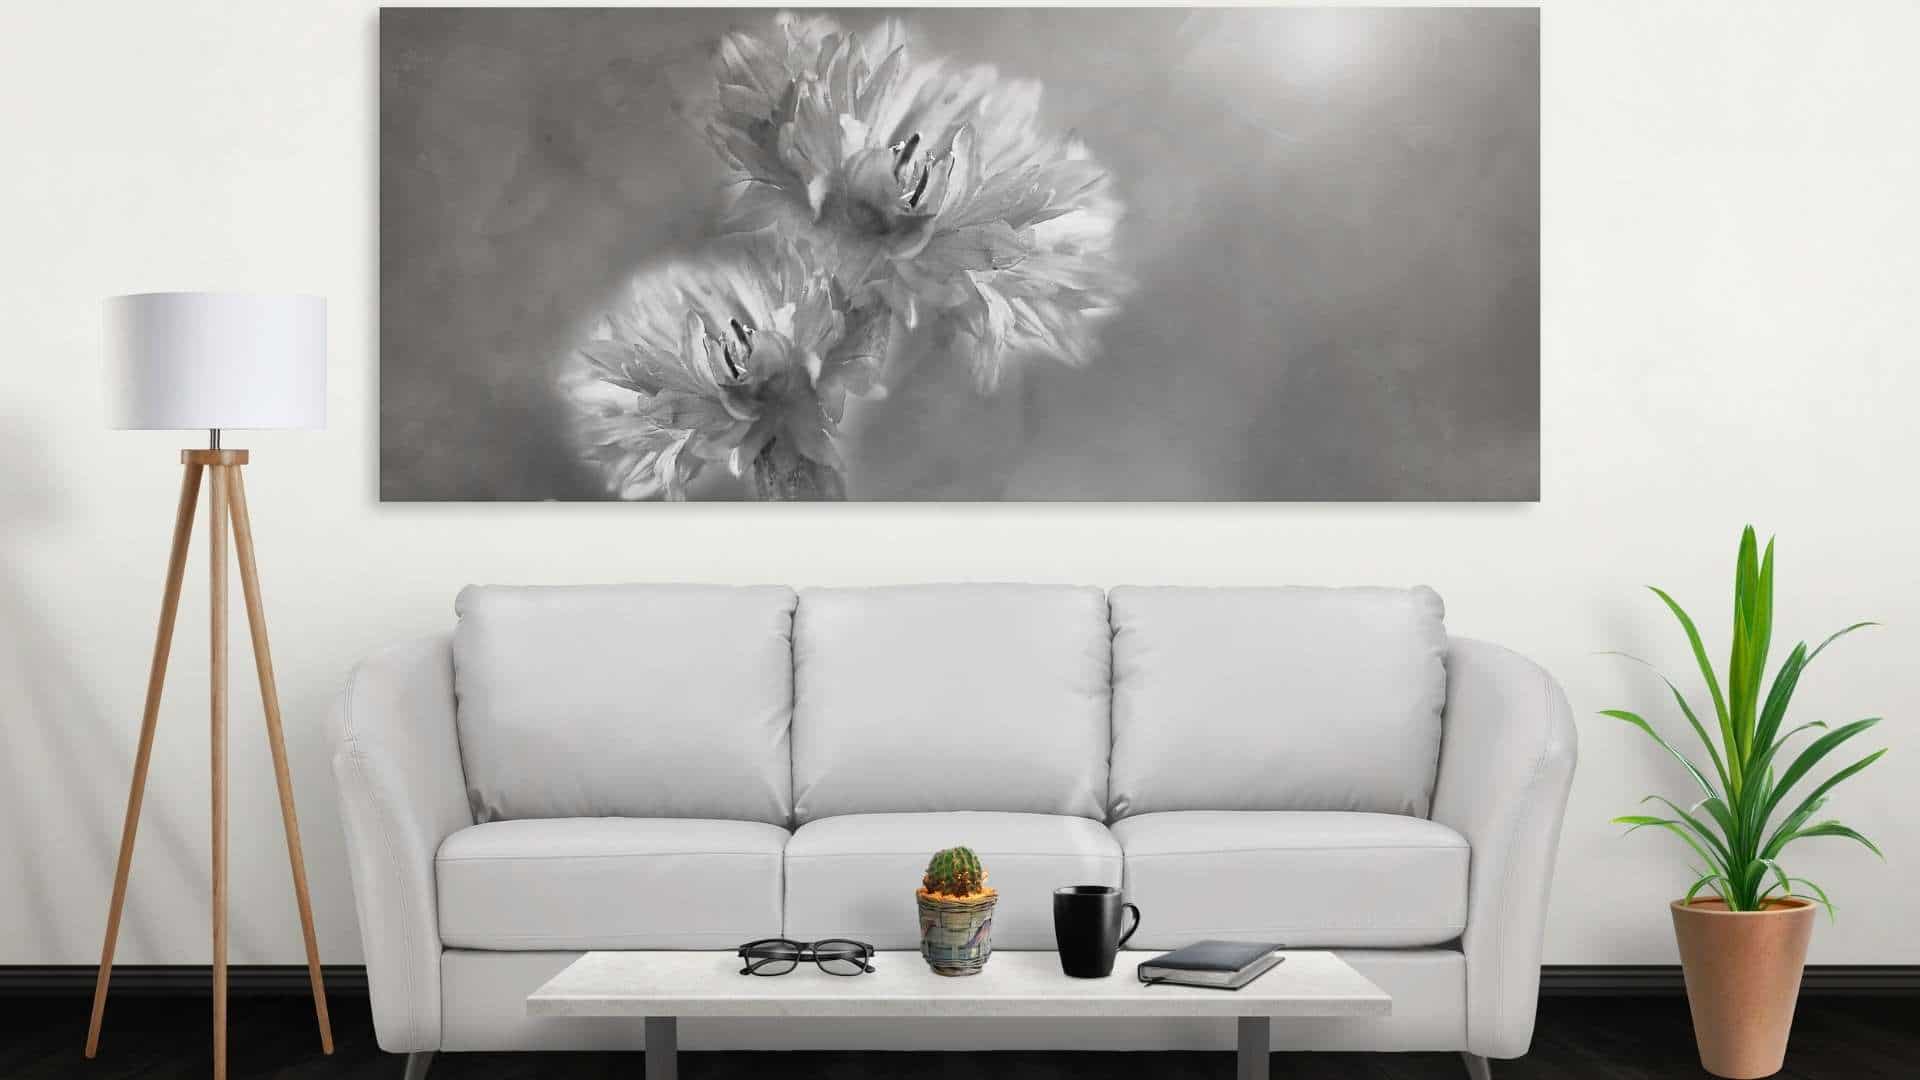 7 Things to Consider When Moving Wall Art